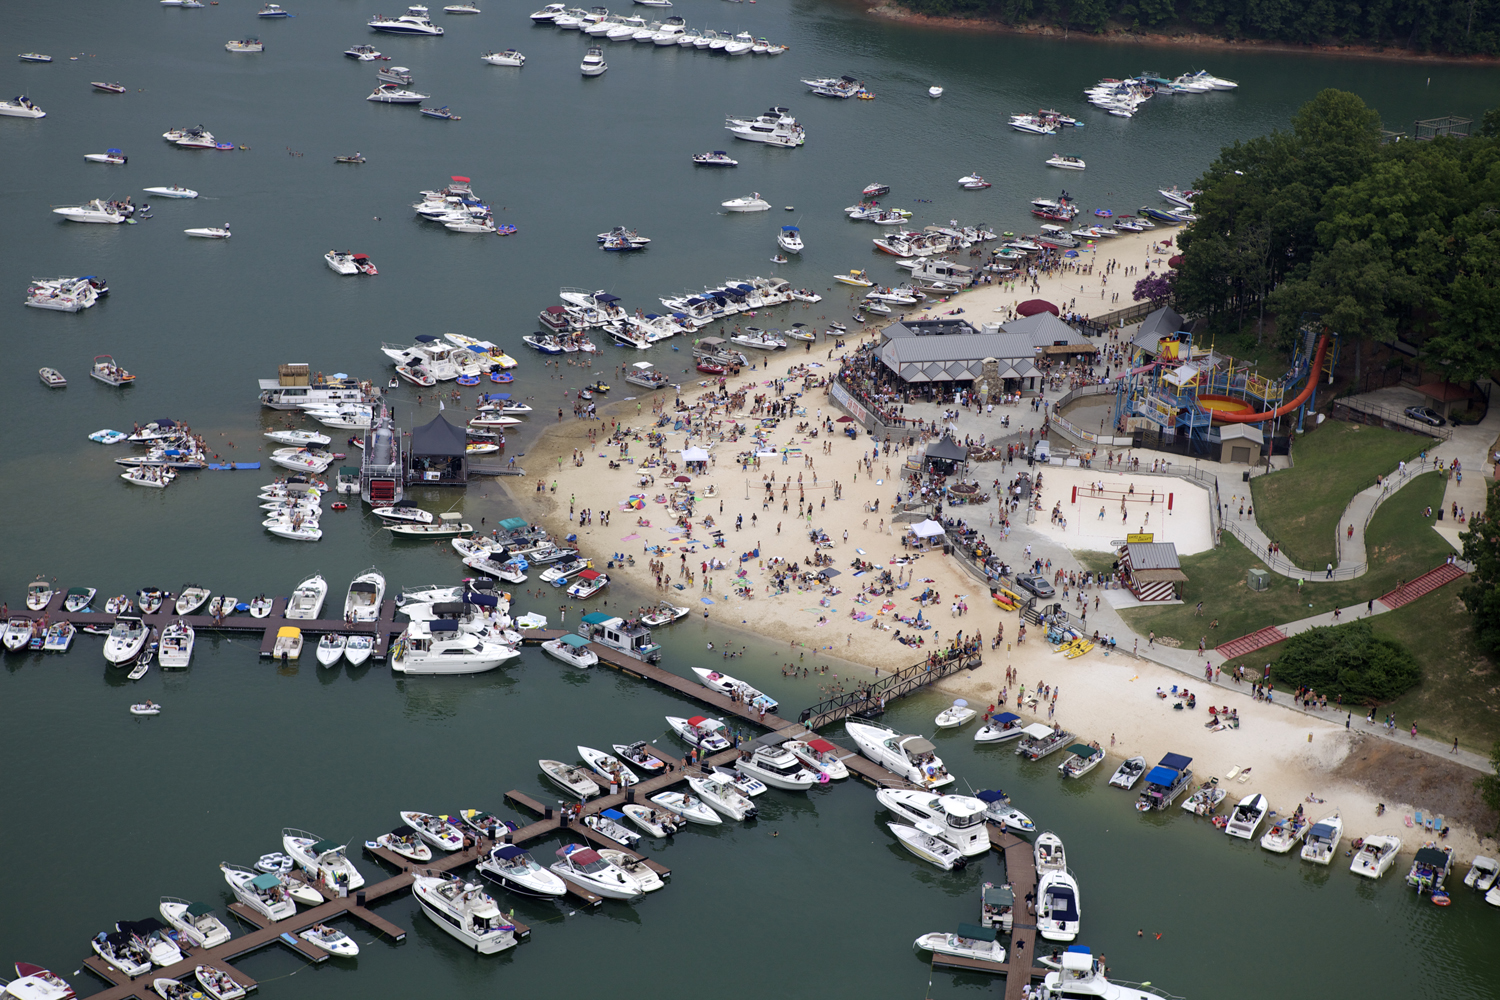 There is a big party cove where I boat at. 